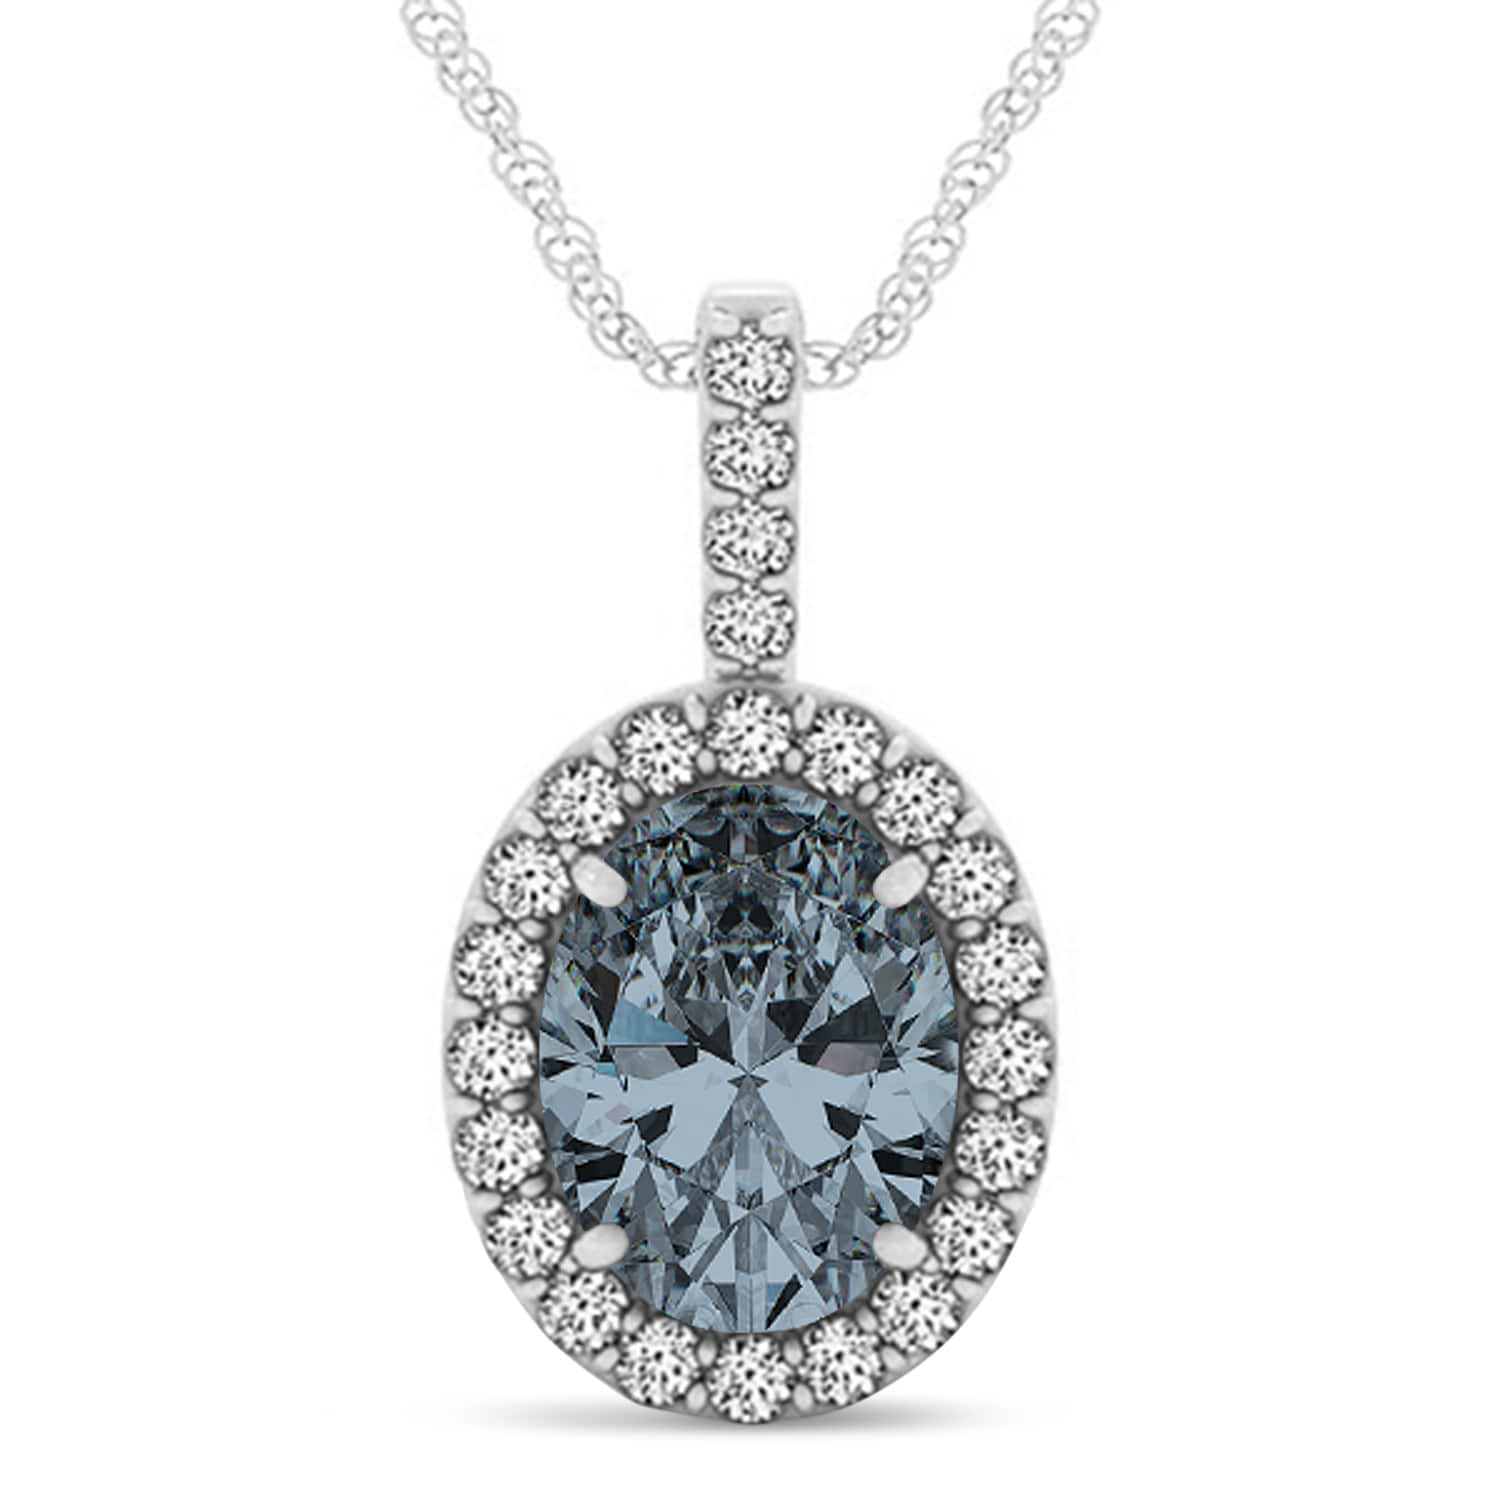 Gray Spinel & Diamond Halo Oval Pendant Necklace 14k White Gold (2.62ct)